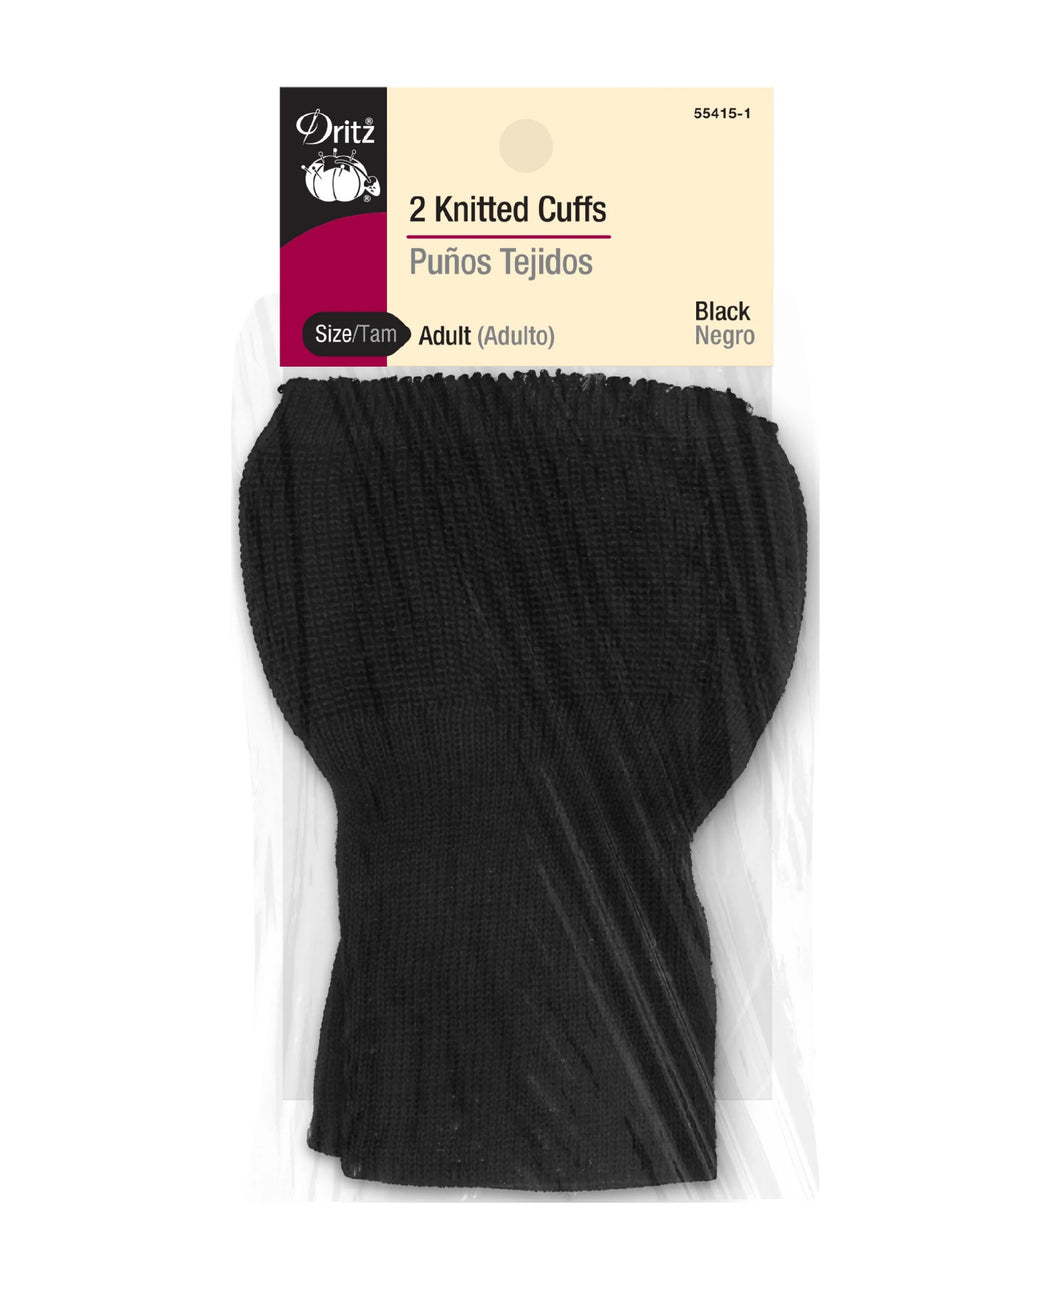 Knitted Cuffs (Adult) - Zipper and Thread